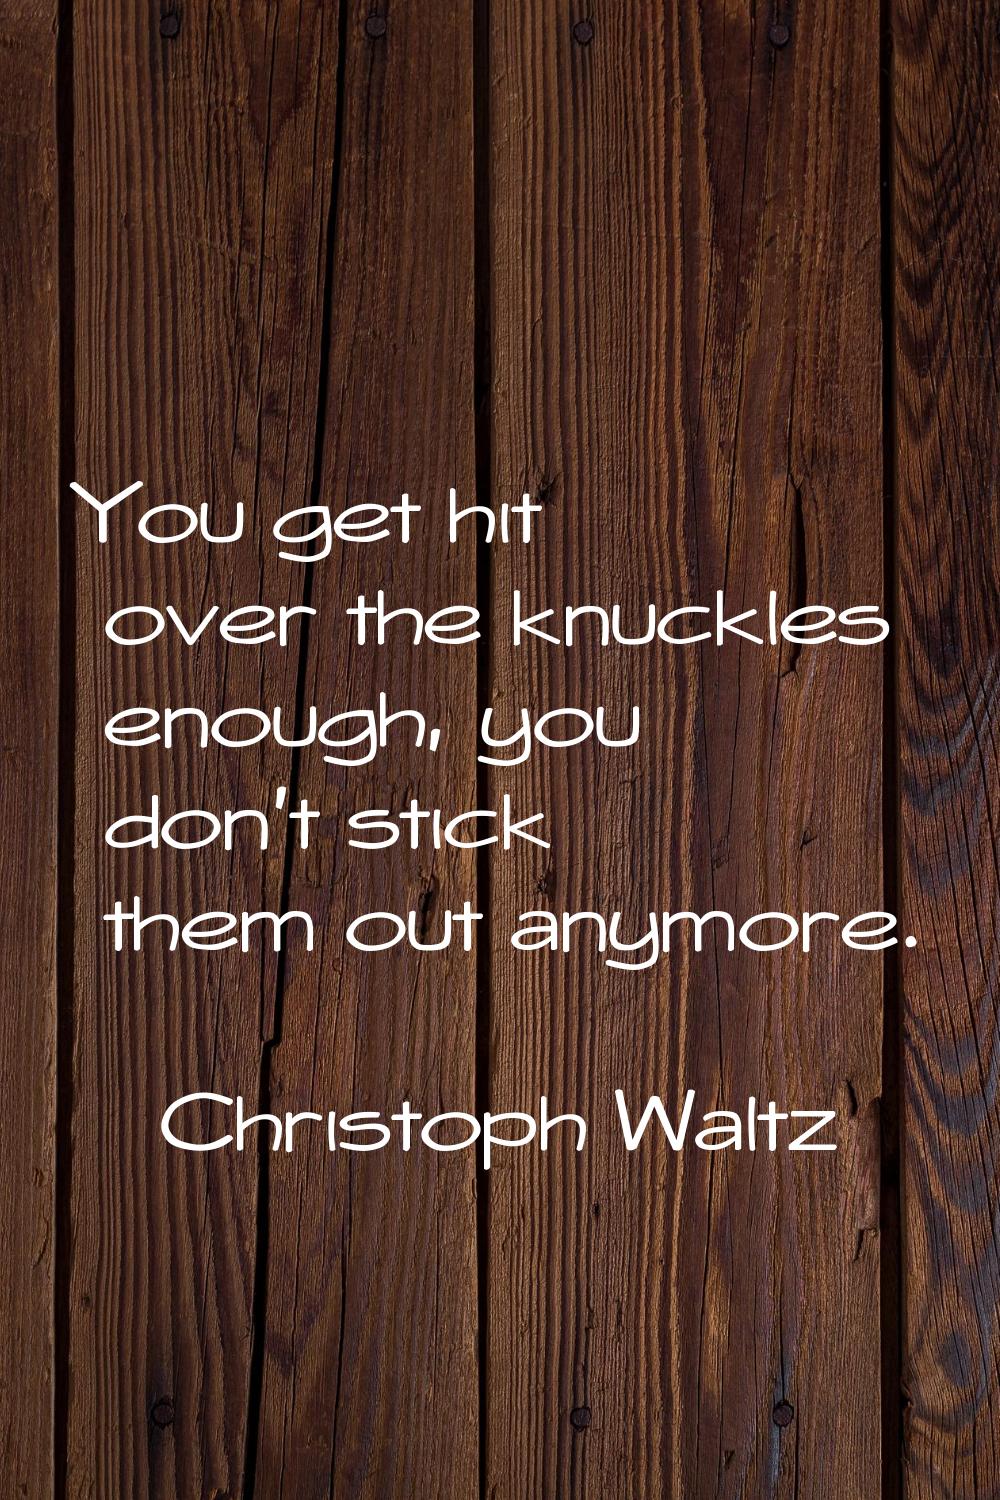 You get hit over the knuckles enough, you don't stick them out anymore.